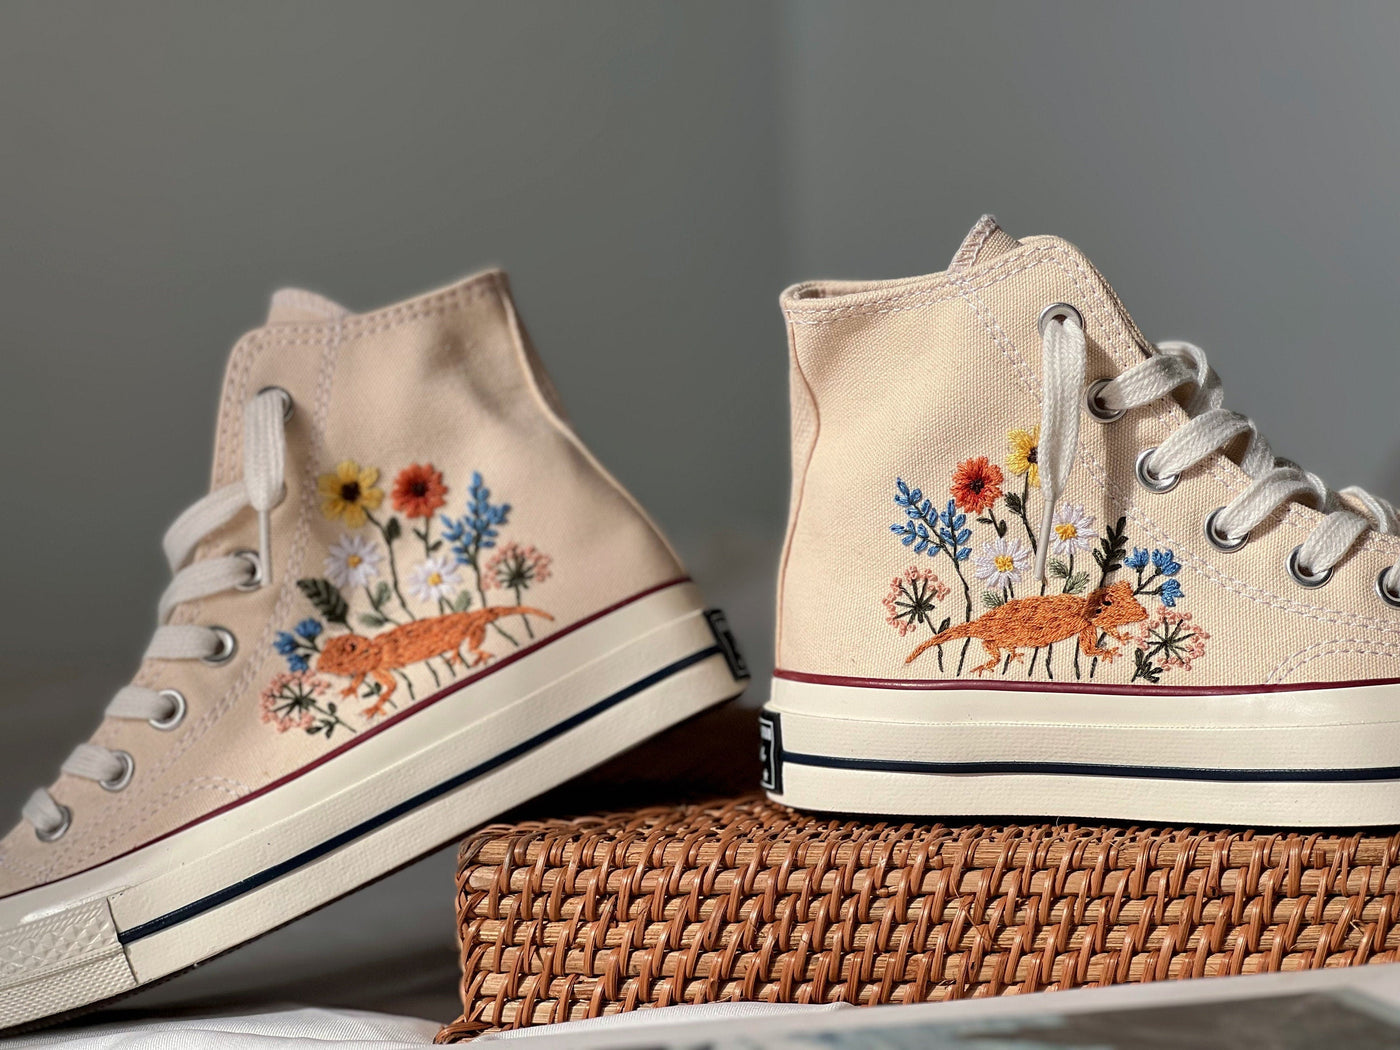 Embroidered Converse High Tops, Embroidered Blue Mushrooms